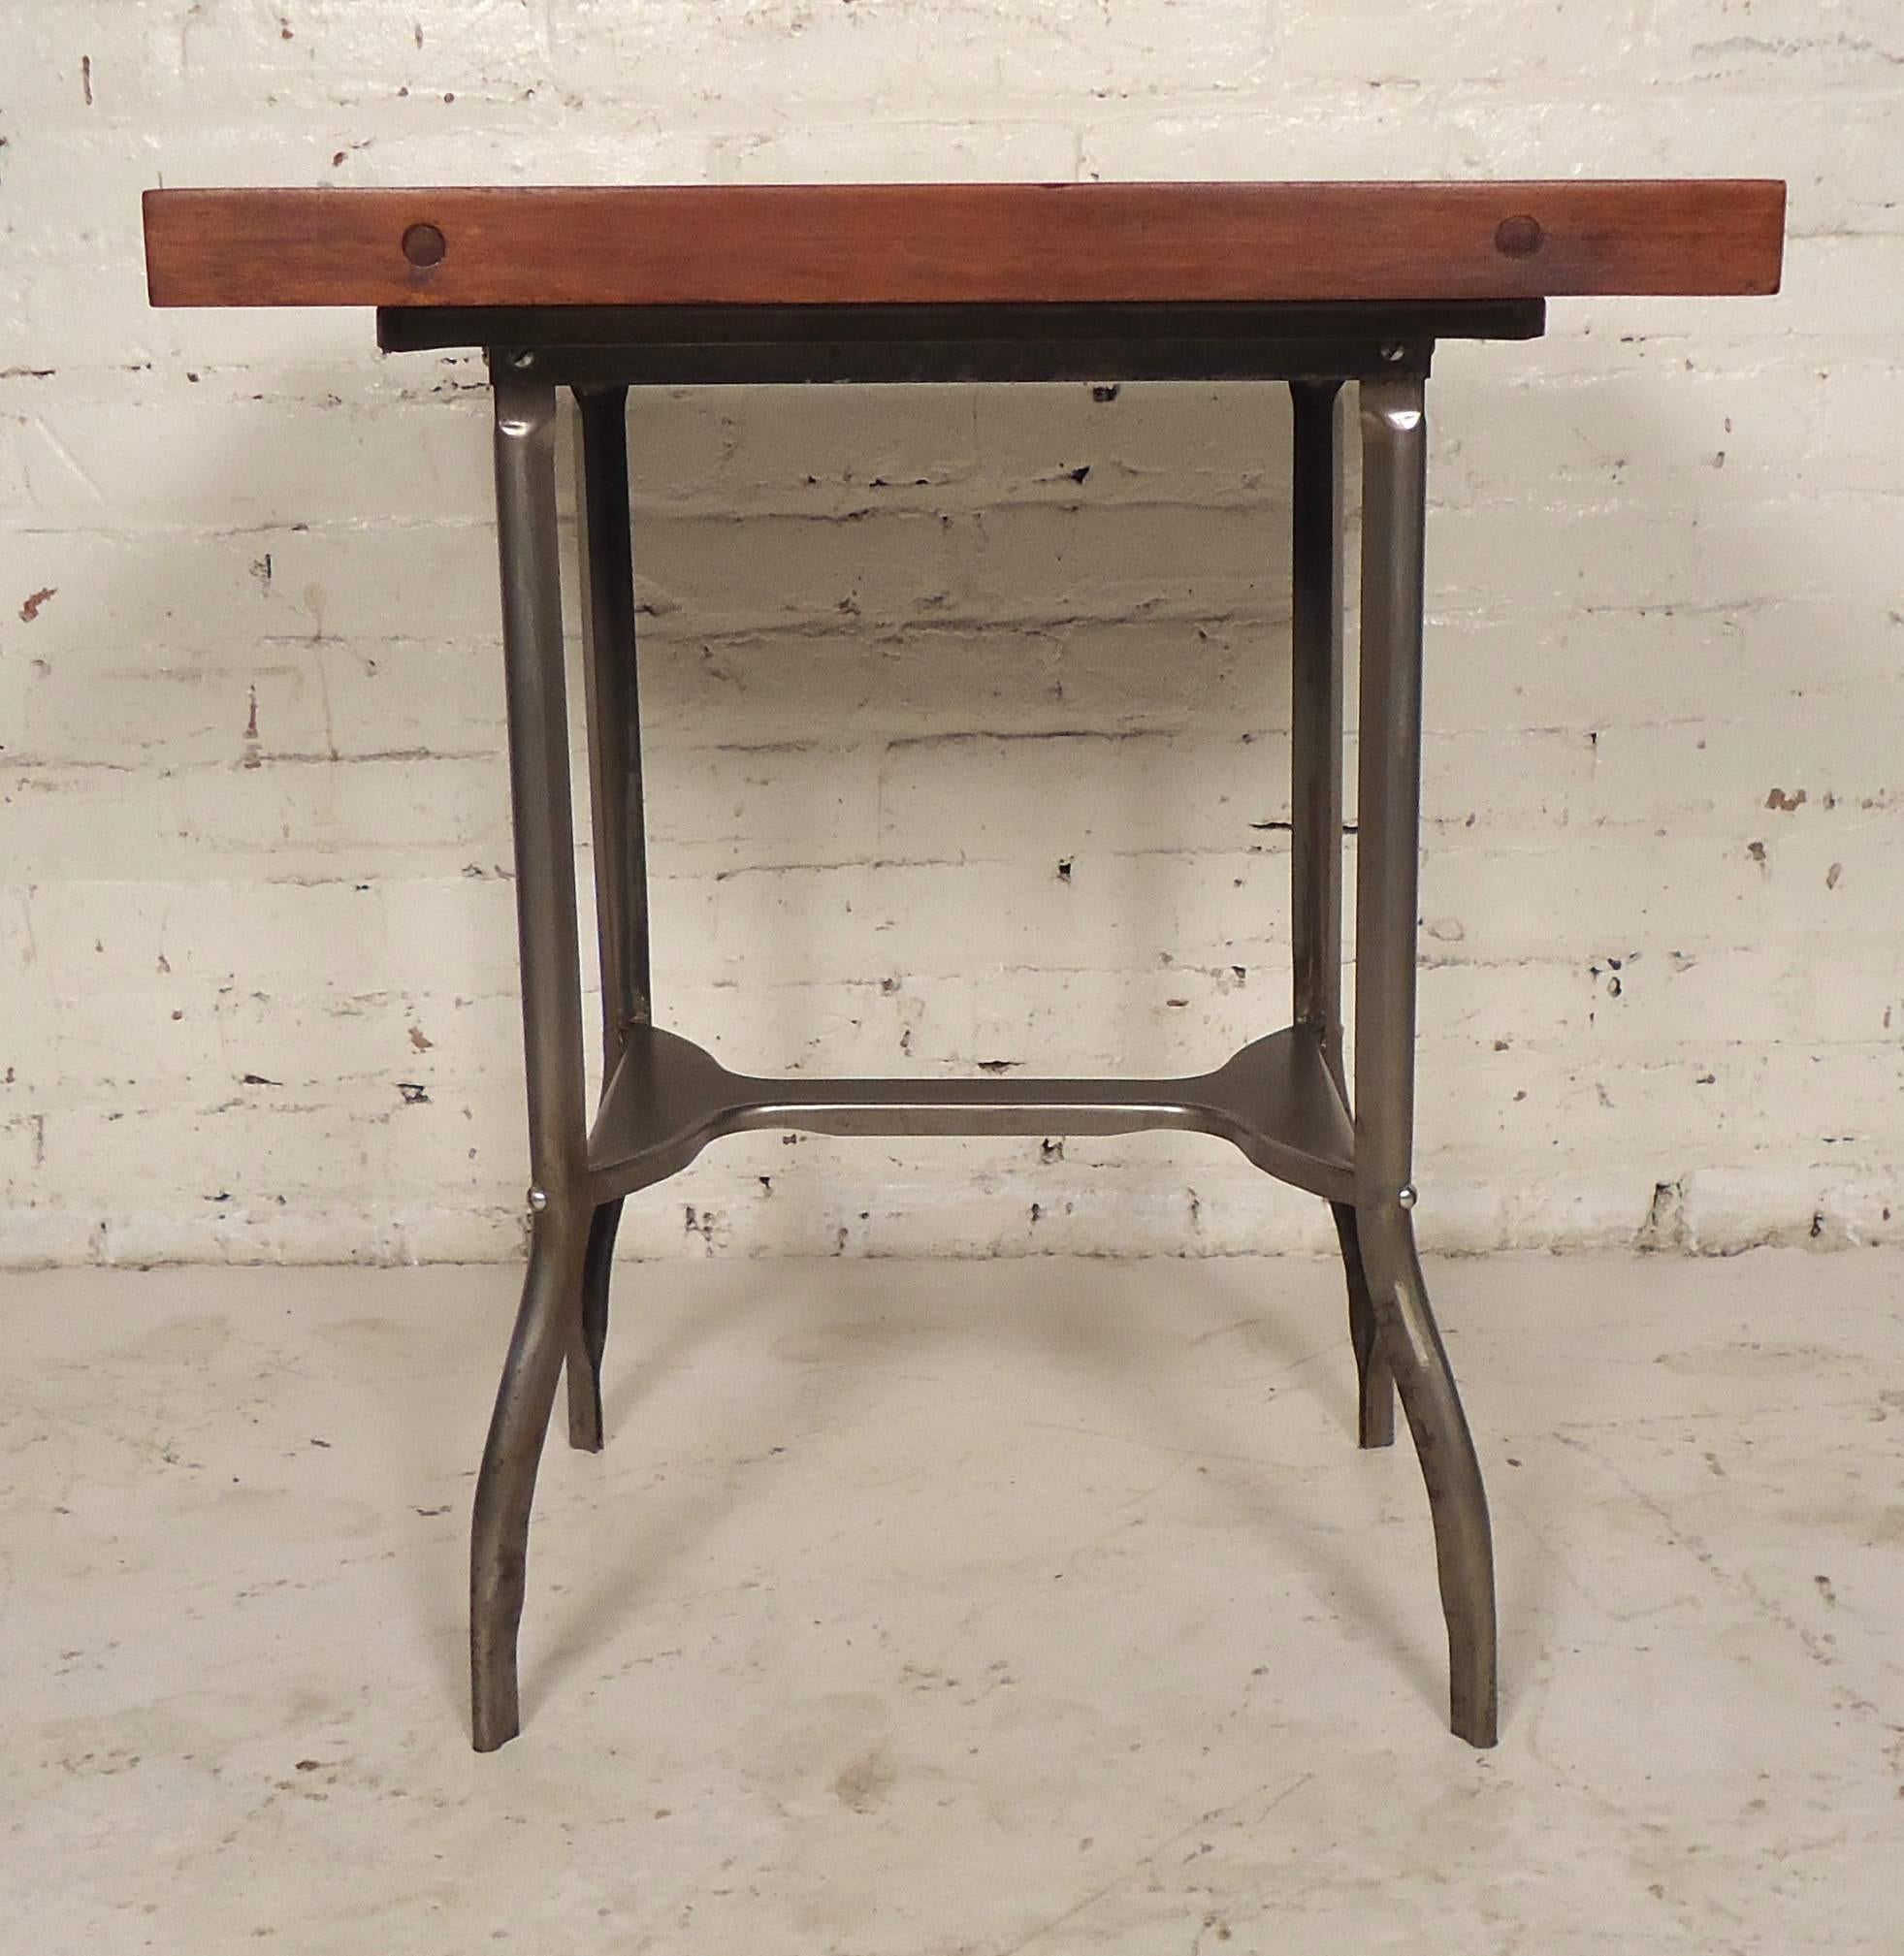 Restored work table with stripped sturdy metal base and wood top. The wood has been stripped down, sanded, and given a clean finish.

(Please confirm item location- NY or NJ with dealer).